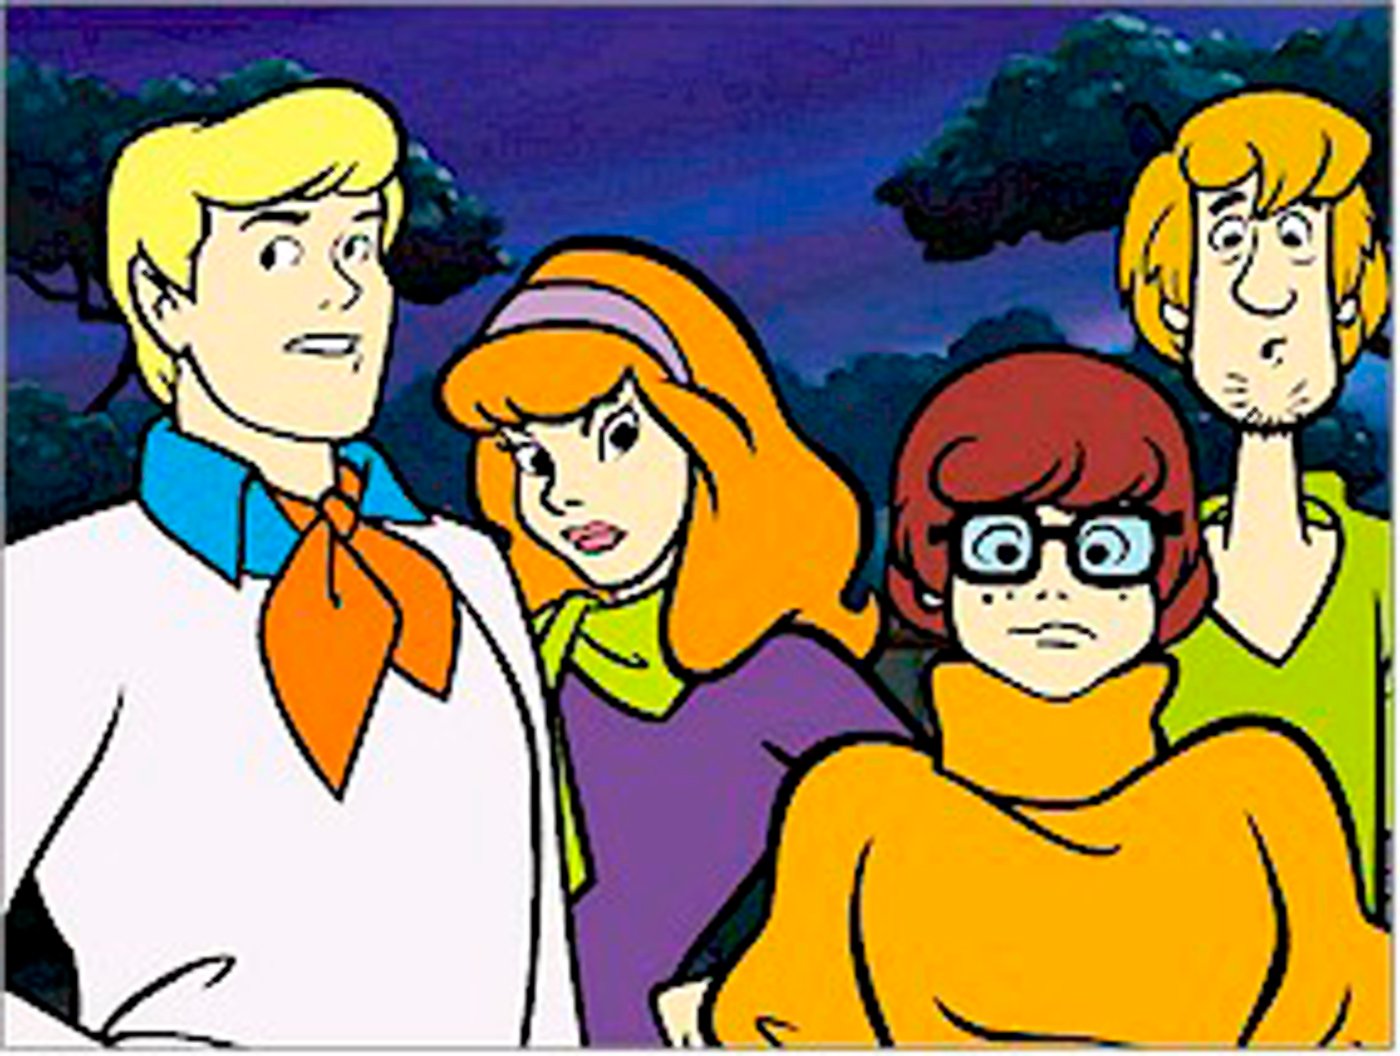 These Actors Star In The New 'Scooby-Doo' Movie